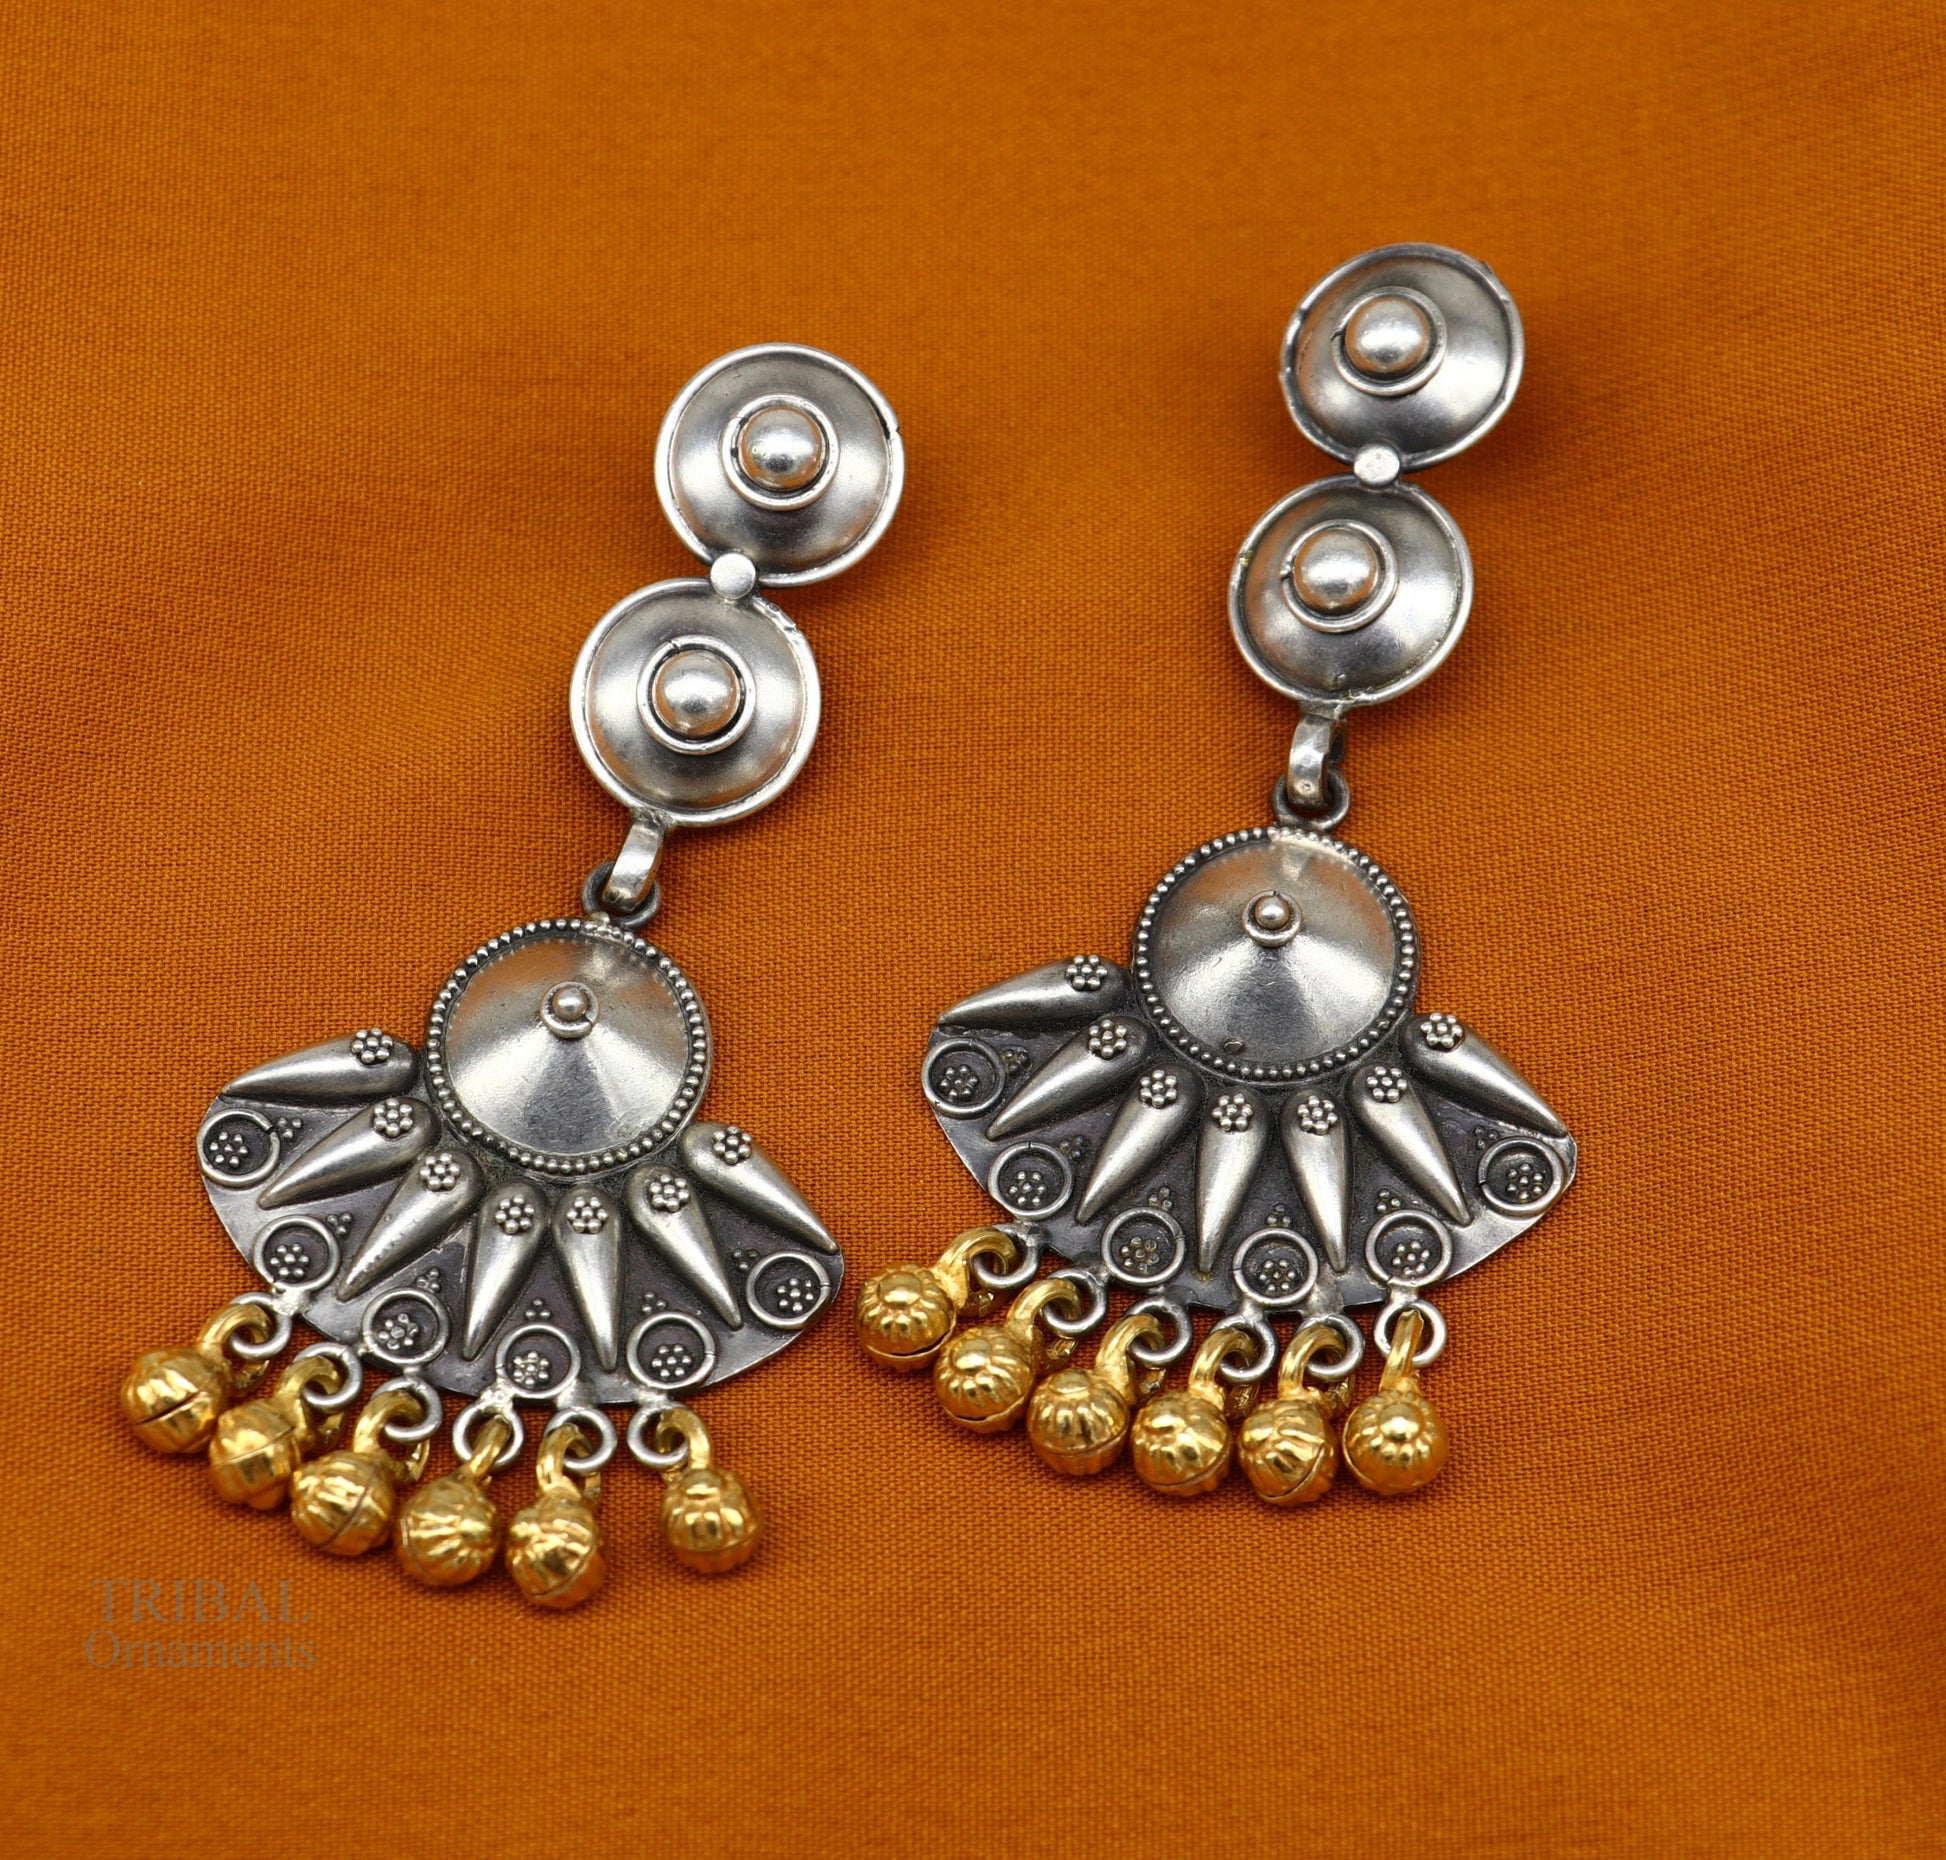 925 sterling silver vintage design traditional stud drop dangle earring with hanging gold polished jingling bells s gifting earrings ear1140 - TRIBAL ORNAMENTS